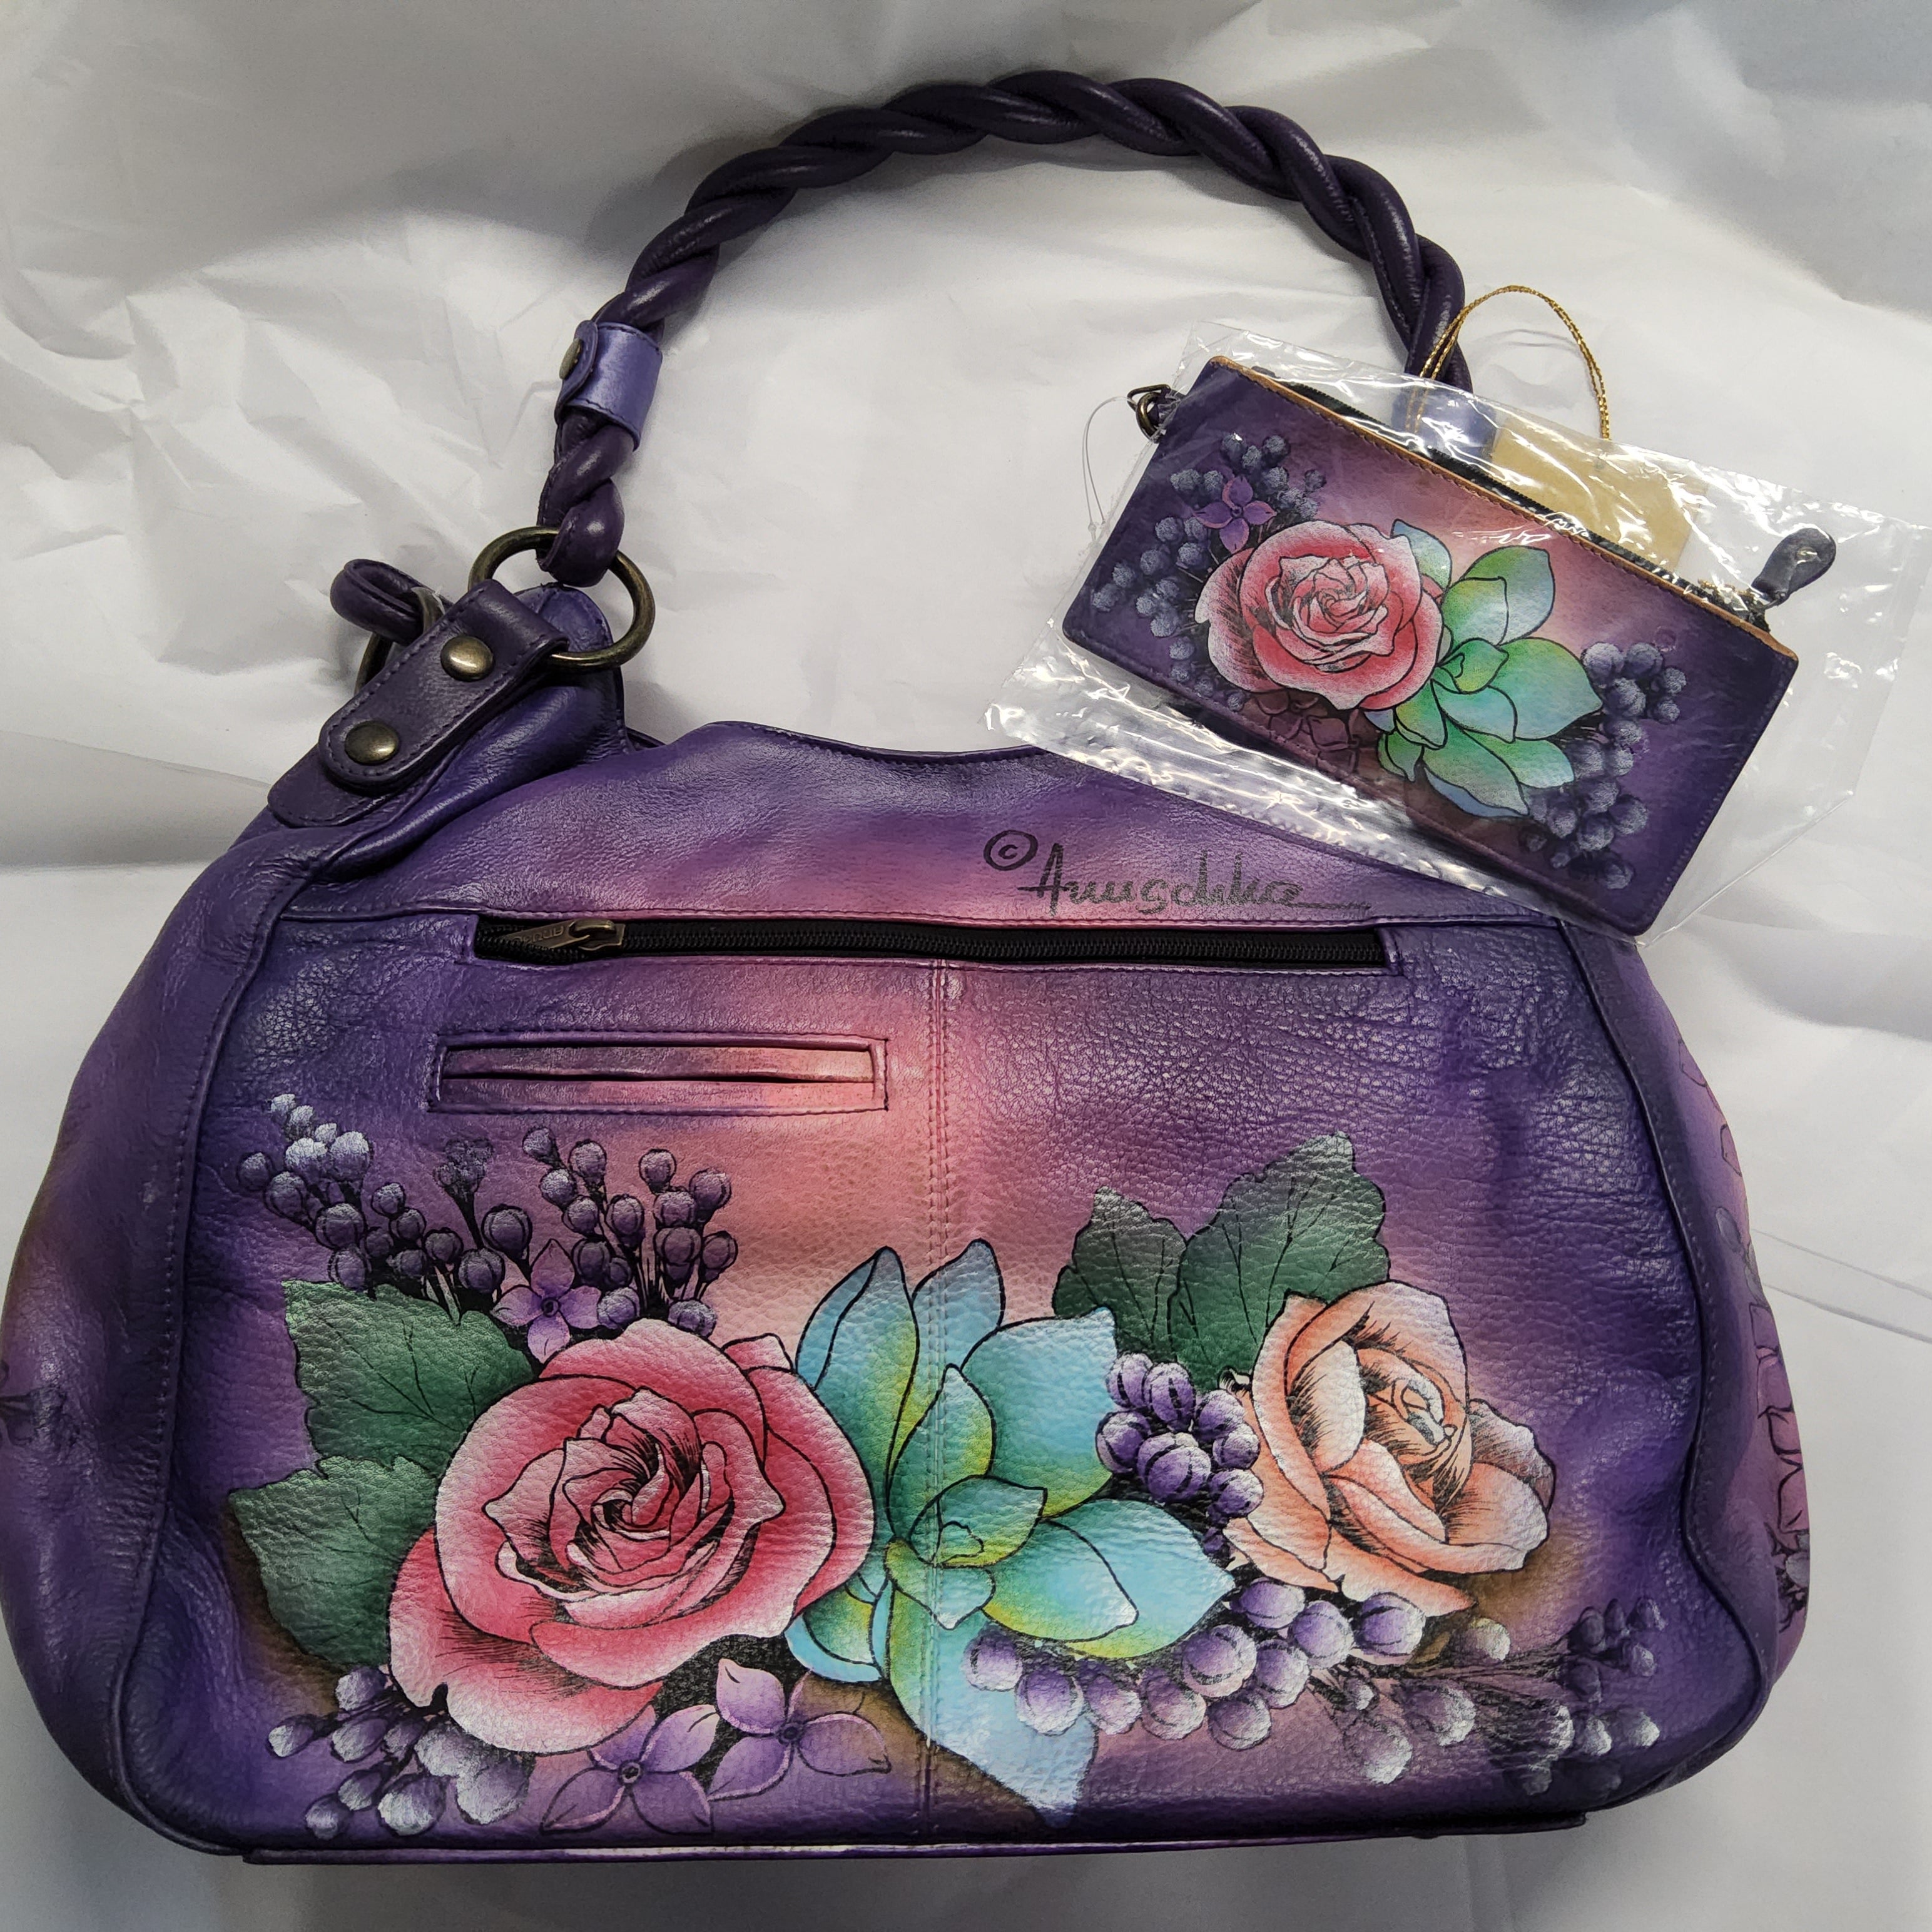 Anuschka Leather Triple Compartment Handbag with Braided Handle - "Lush Lilac" Hand painted - 533-LLC